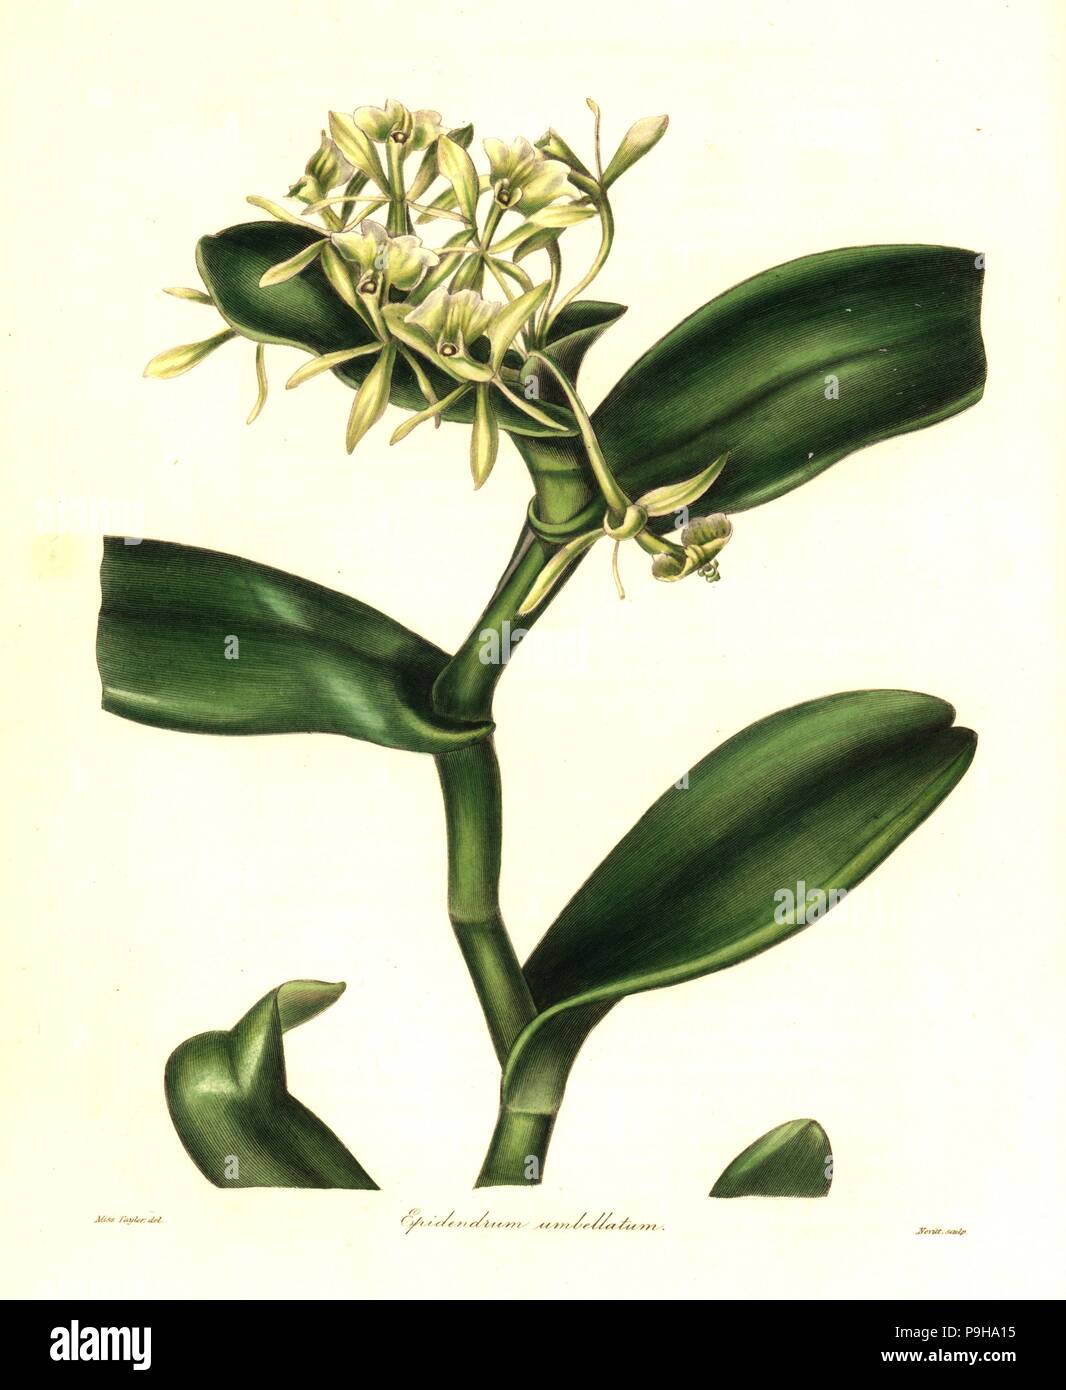 Umbellated epidendrum orchid, Epidendrum umbellatum. Handcoloured copperplate engraving by S. Nevitt after a botanical illustration by Miss Jane Taylor from Benjamin Maund and the Rev. John Stevens Henslow's The Botanist, London, 1836. Stock Photo